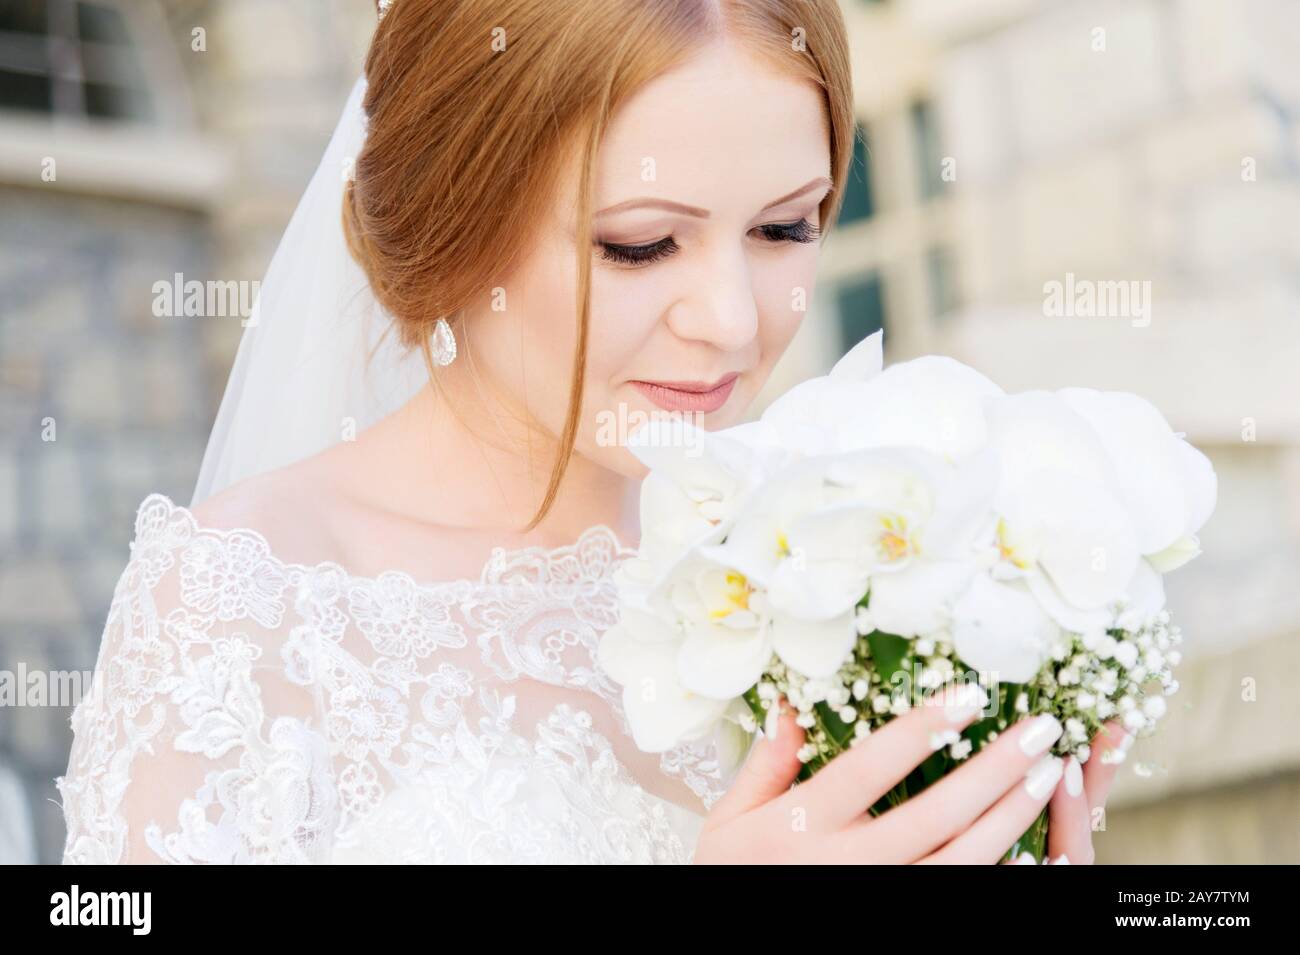 A young bride in a white dress is sniffing her wedding bouquet that is carefully held by her hands Stock Photo